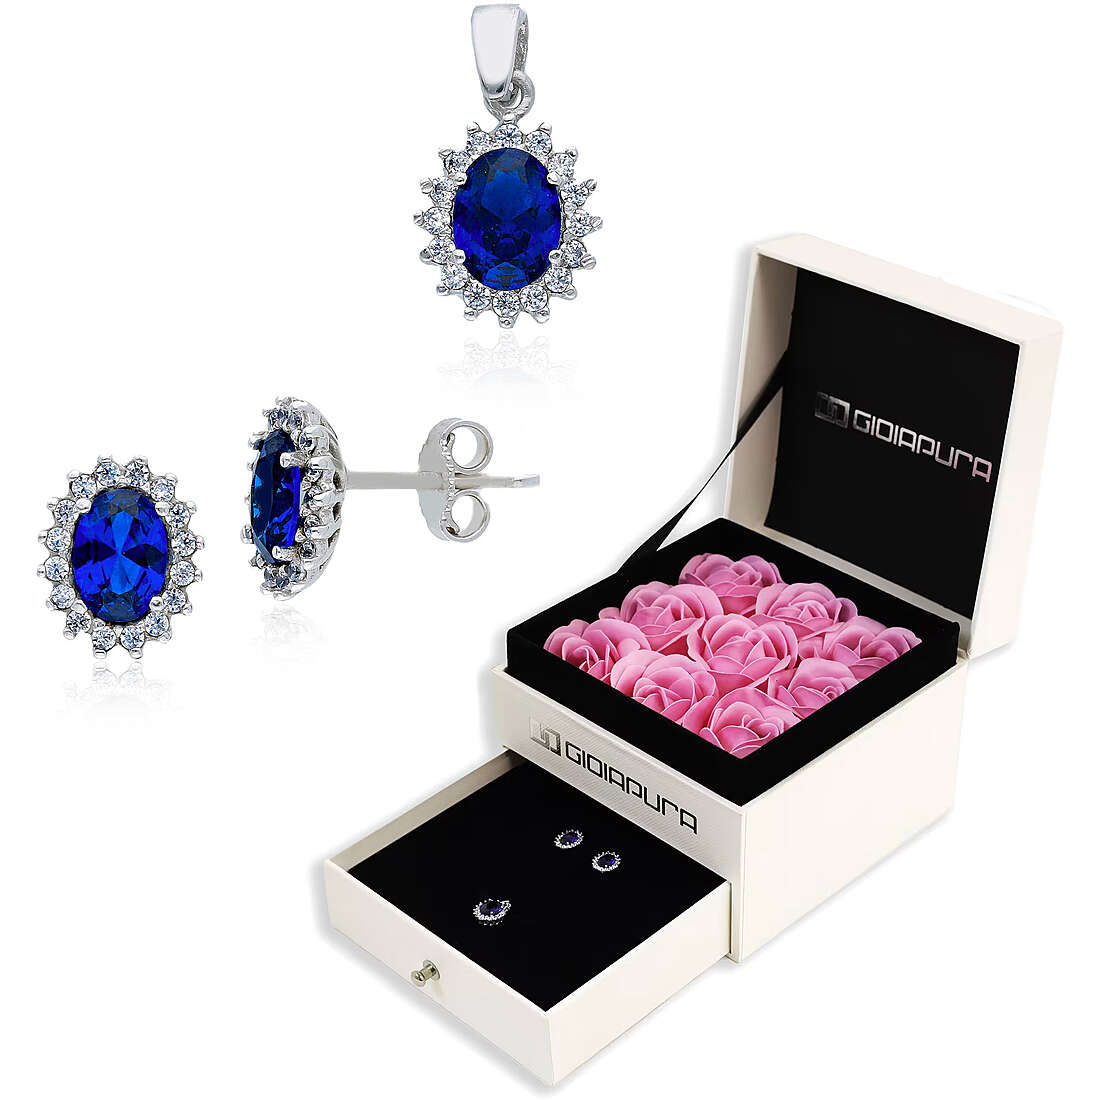 Women's Jewelry Set with Earrings and Pendant GPSET05